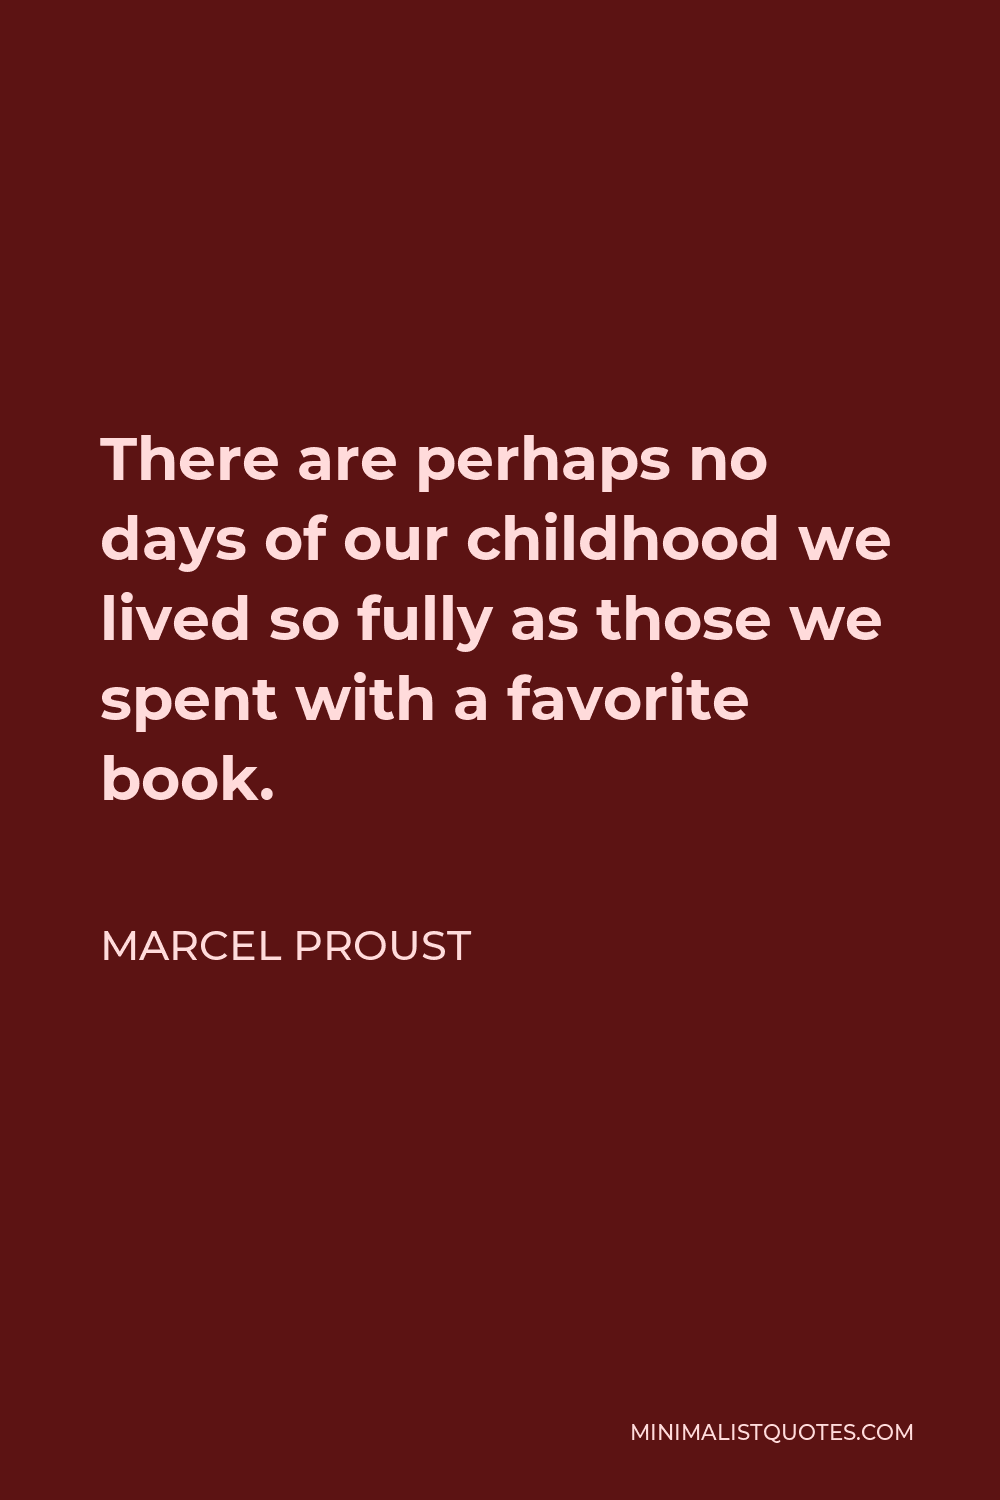 Marcel Proust Quote - There are perhaps no days of our childhood we lived so fully as those we spent with a favorite book.